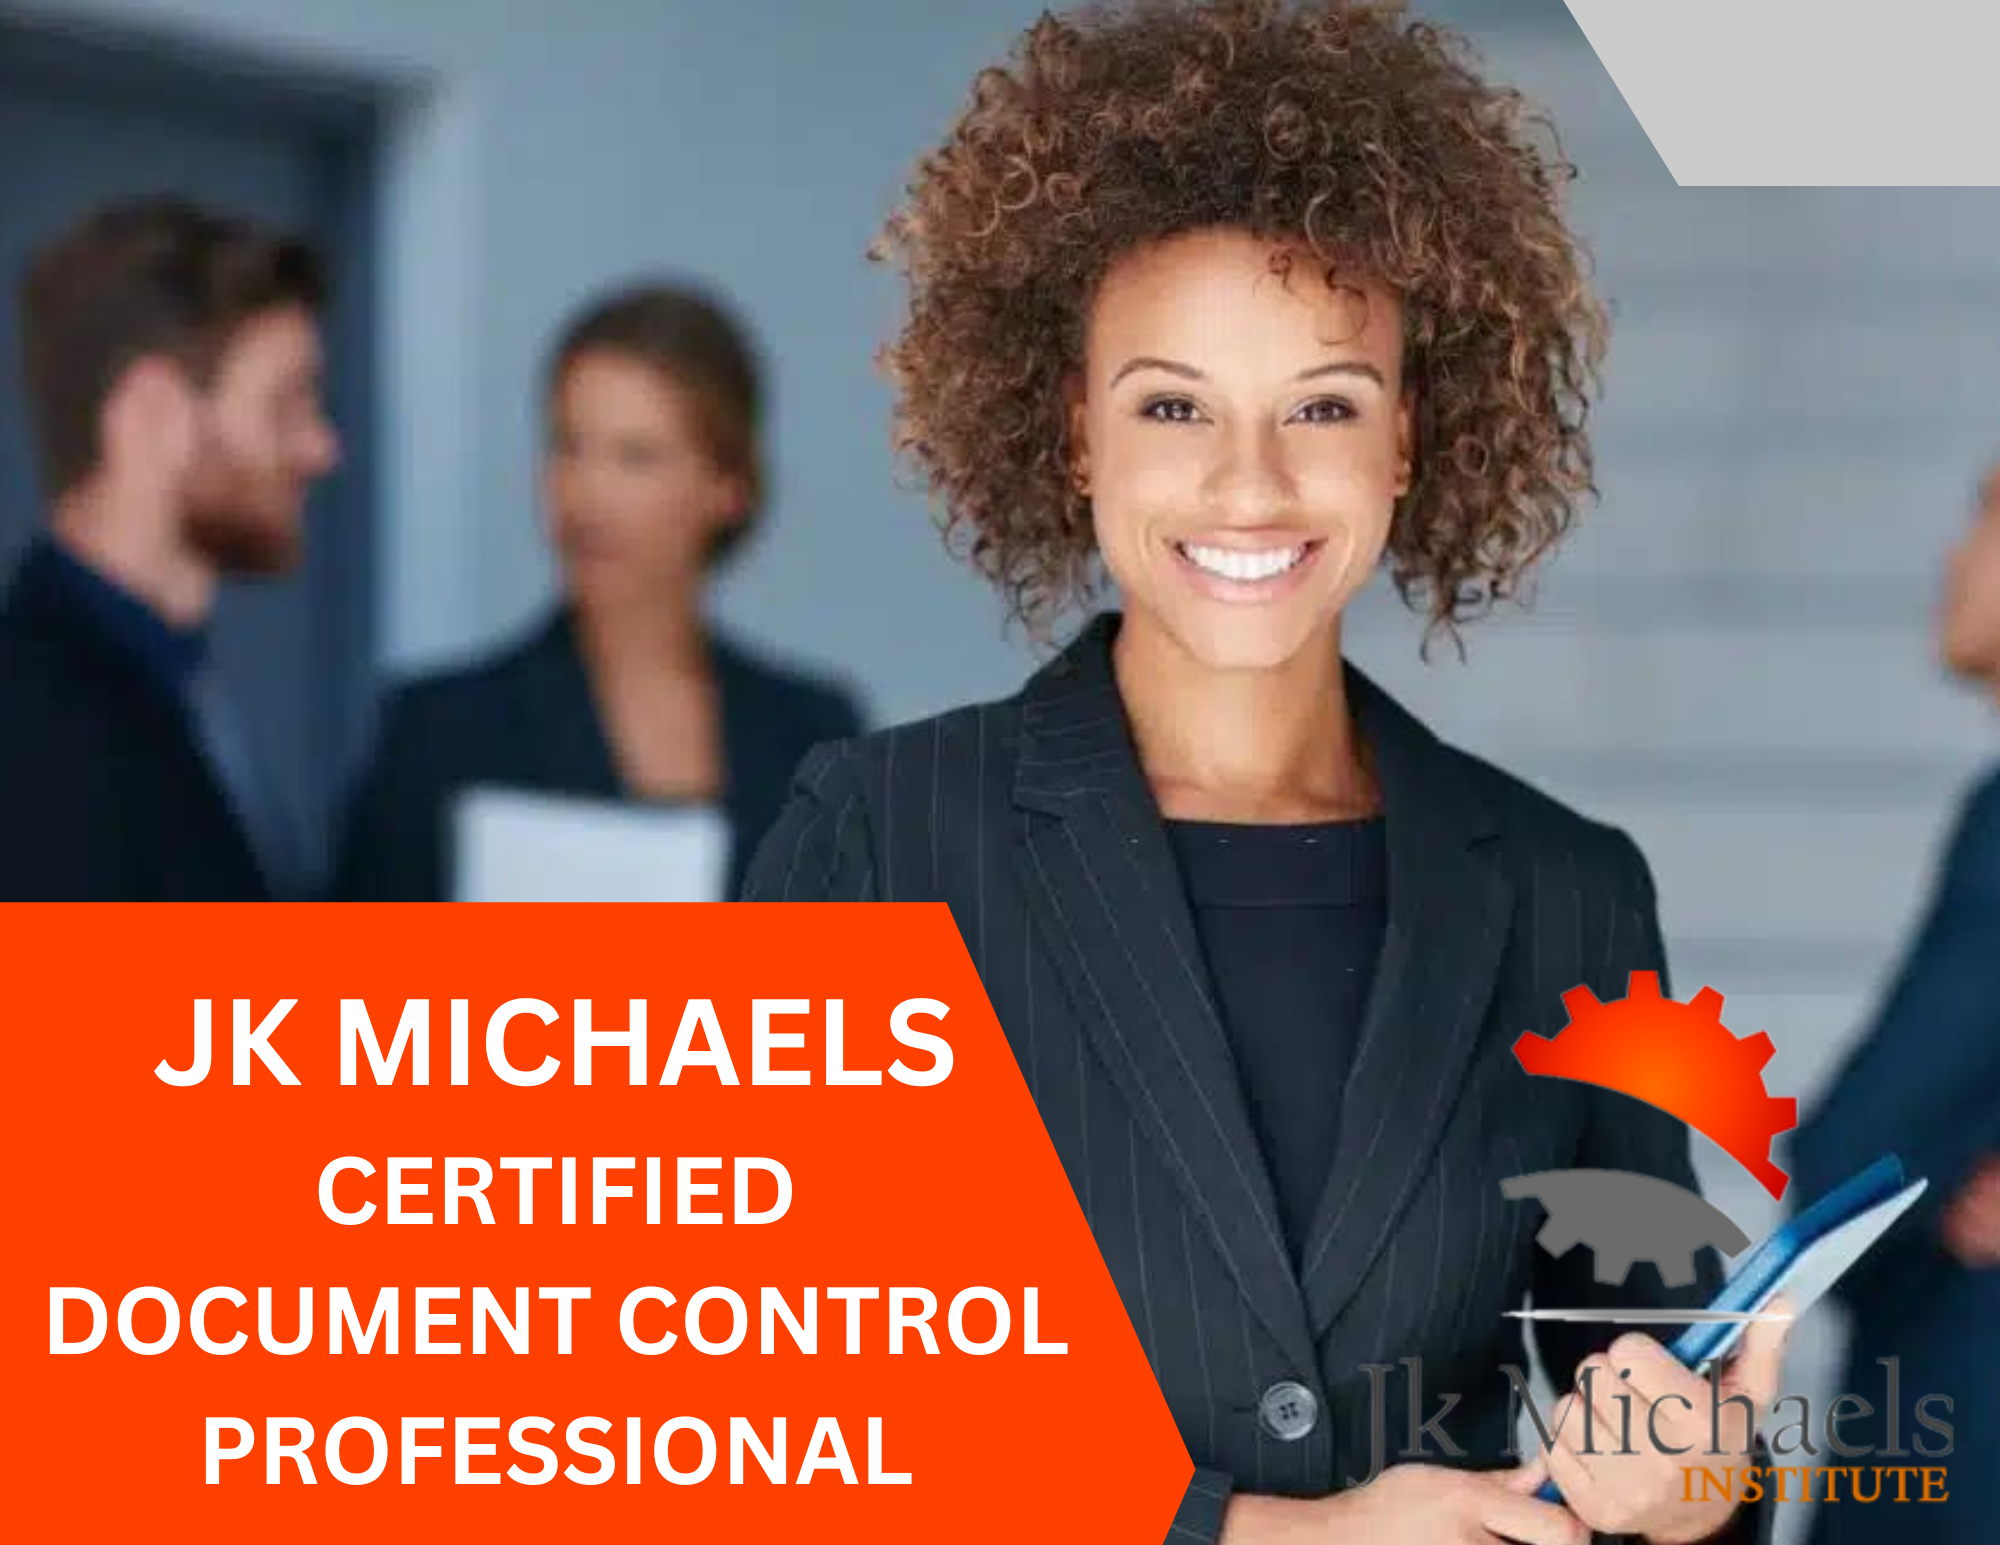 CERTIFIED DOCUMENT CONTROL PROFESSIONAL